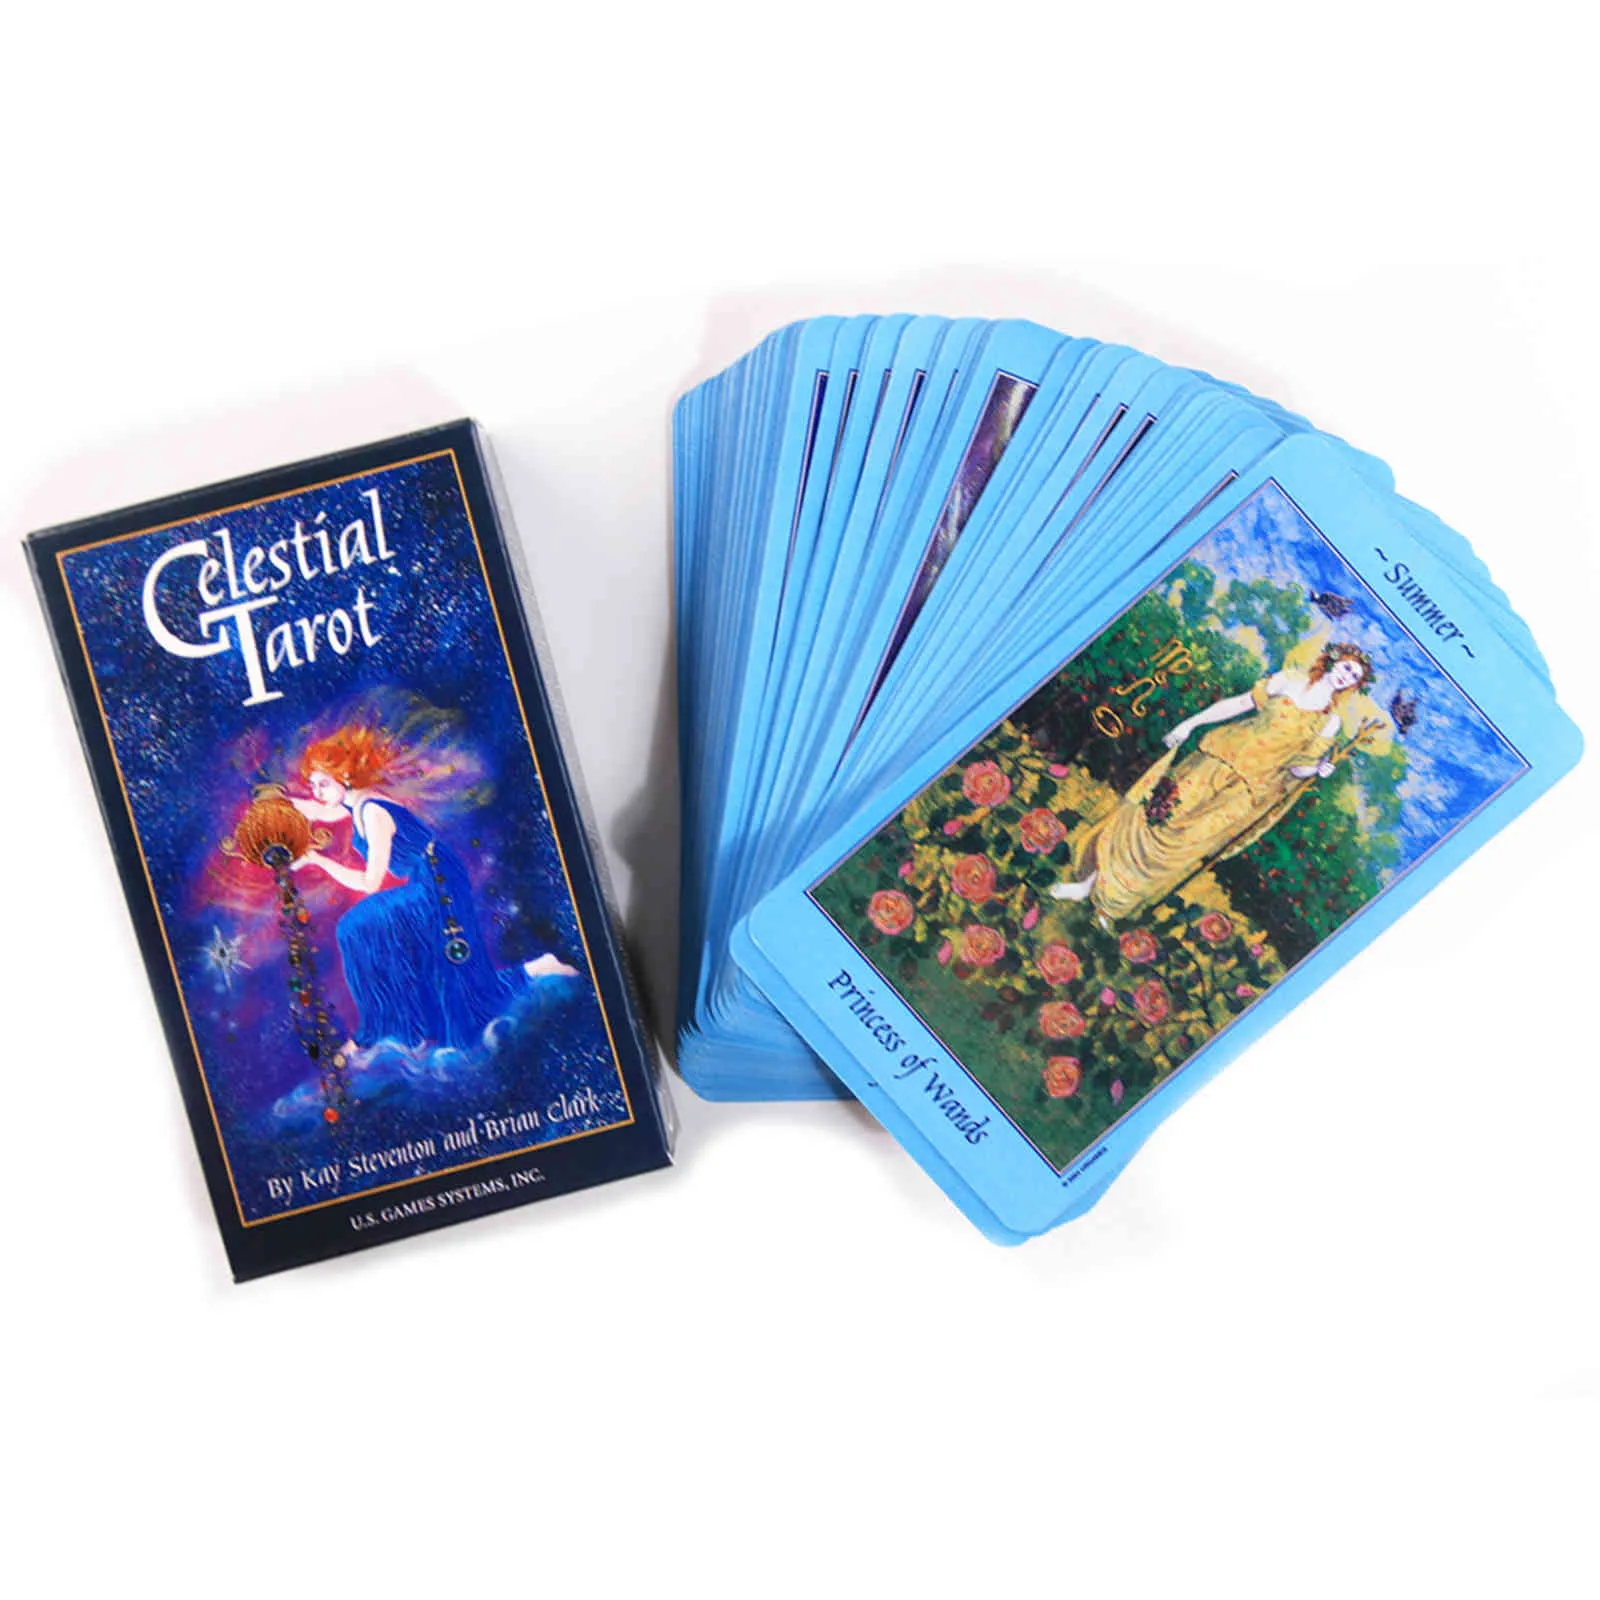 Tarot Cards 78 Full Color Deck oracles Card Game Board Toy Popular For Beginners Set Divination Exquisite saleYV5P